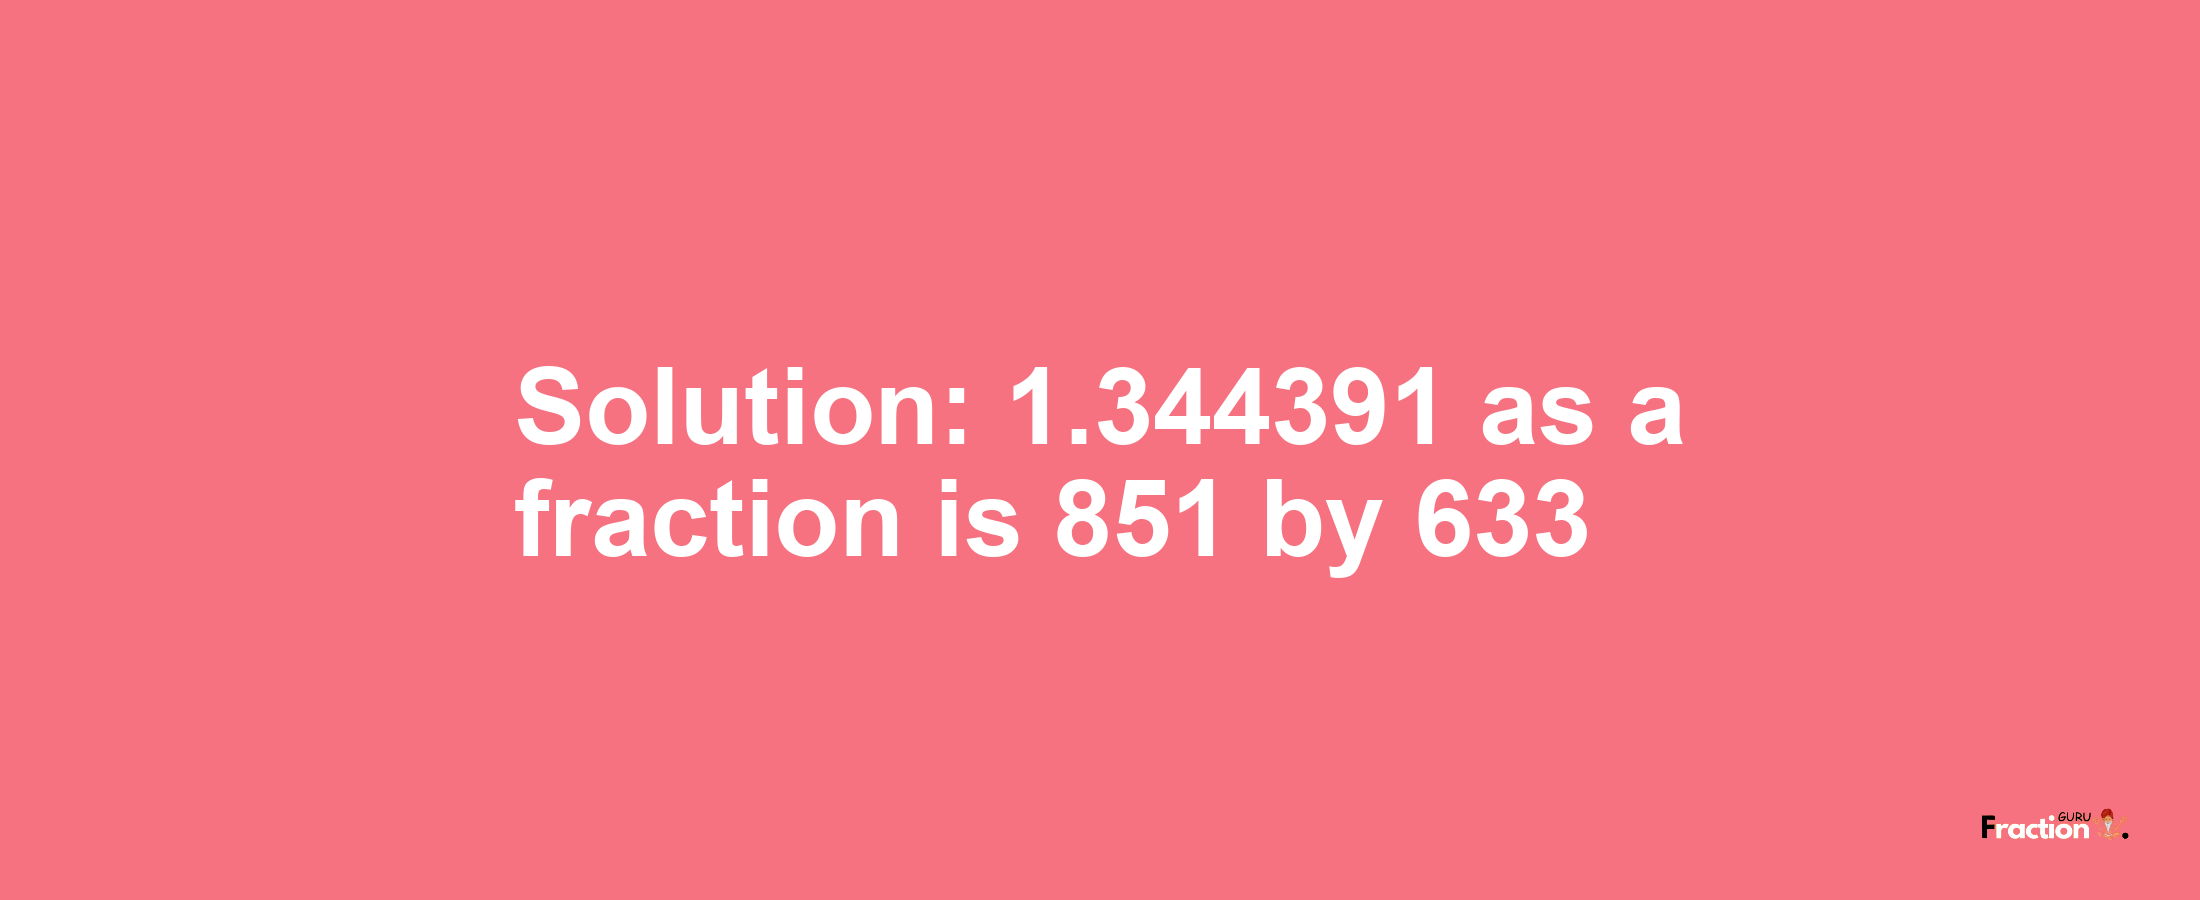 Solution:1.344391 as a fraction is 851/633